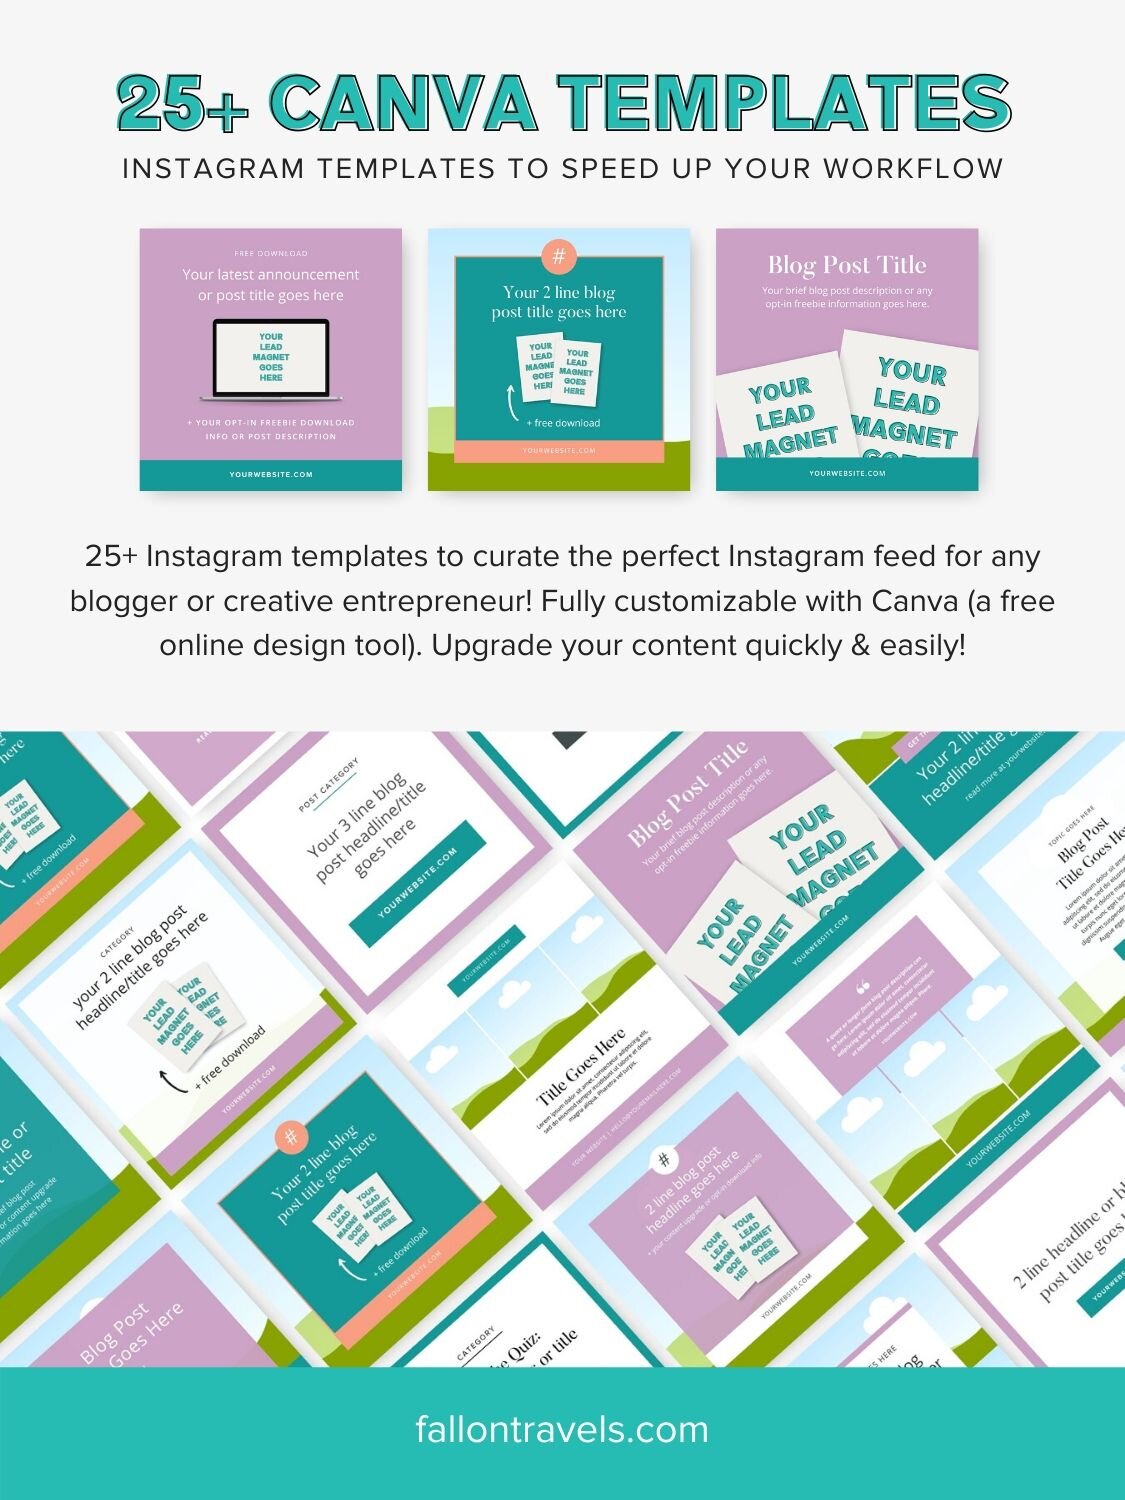 25+ Instagram Post Templates for Canva — Fallon Travels